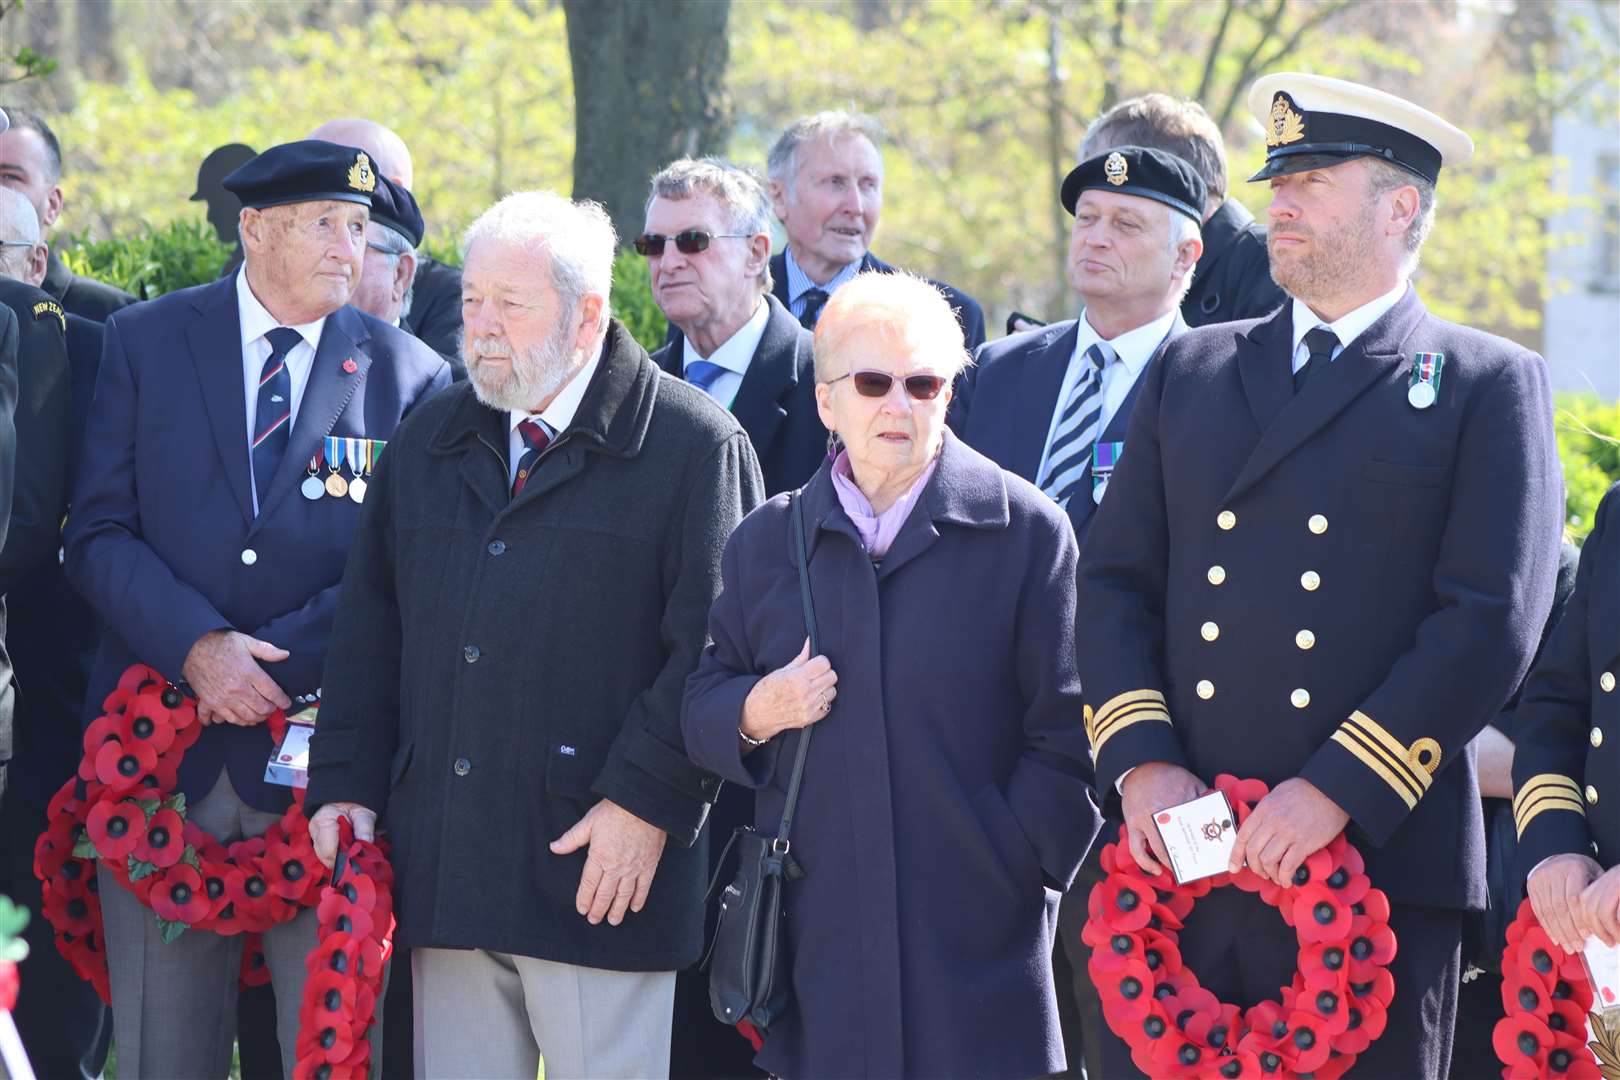 Peter MacDonald, left, at the dedication ceremony for the new memorial wall at Sheerness war memorial on Sunday